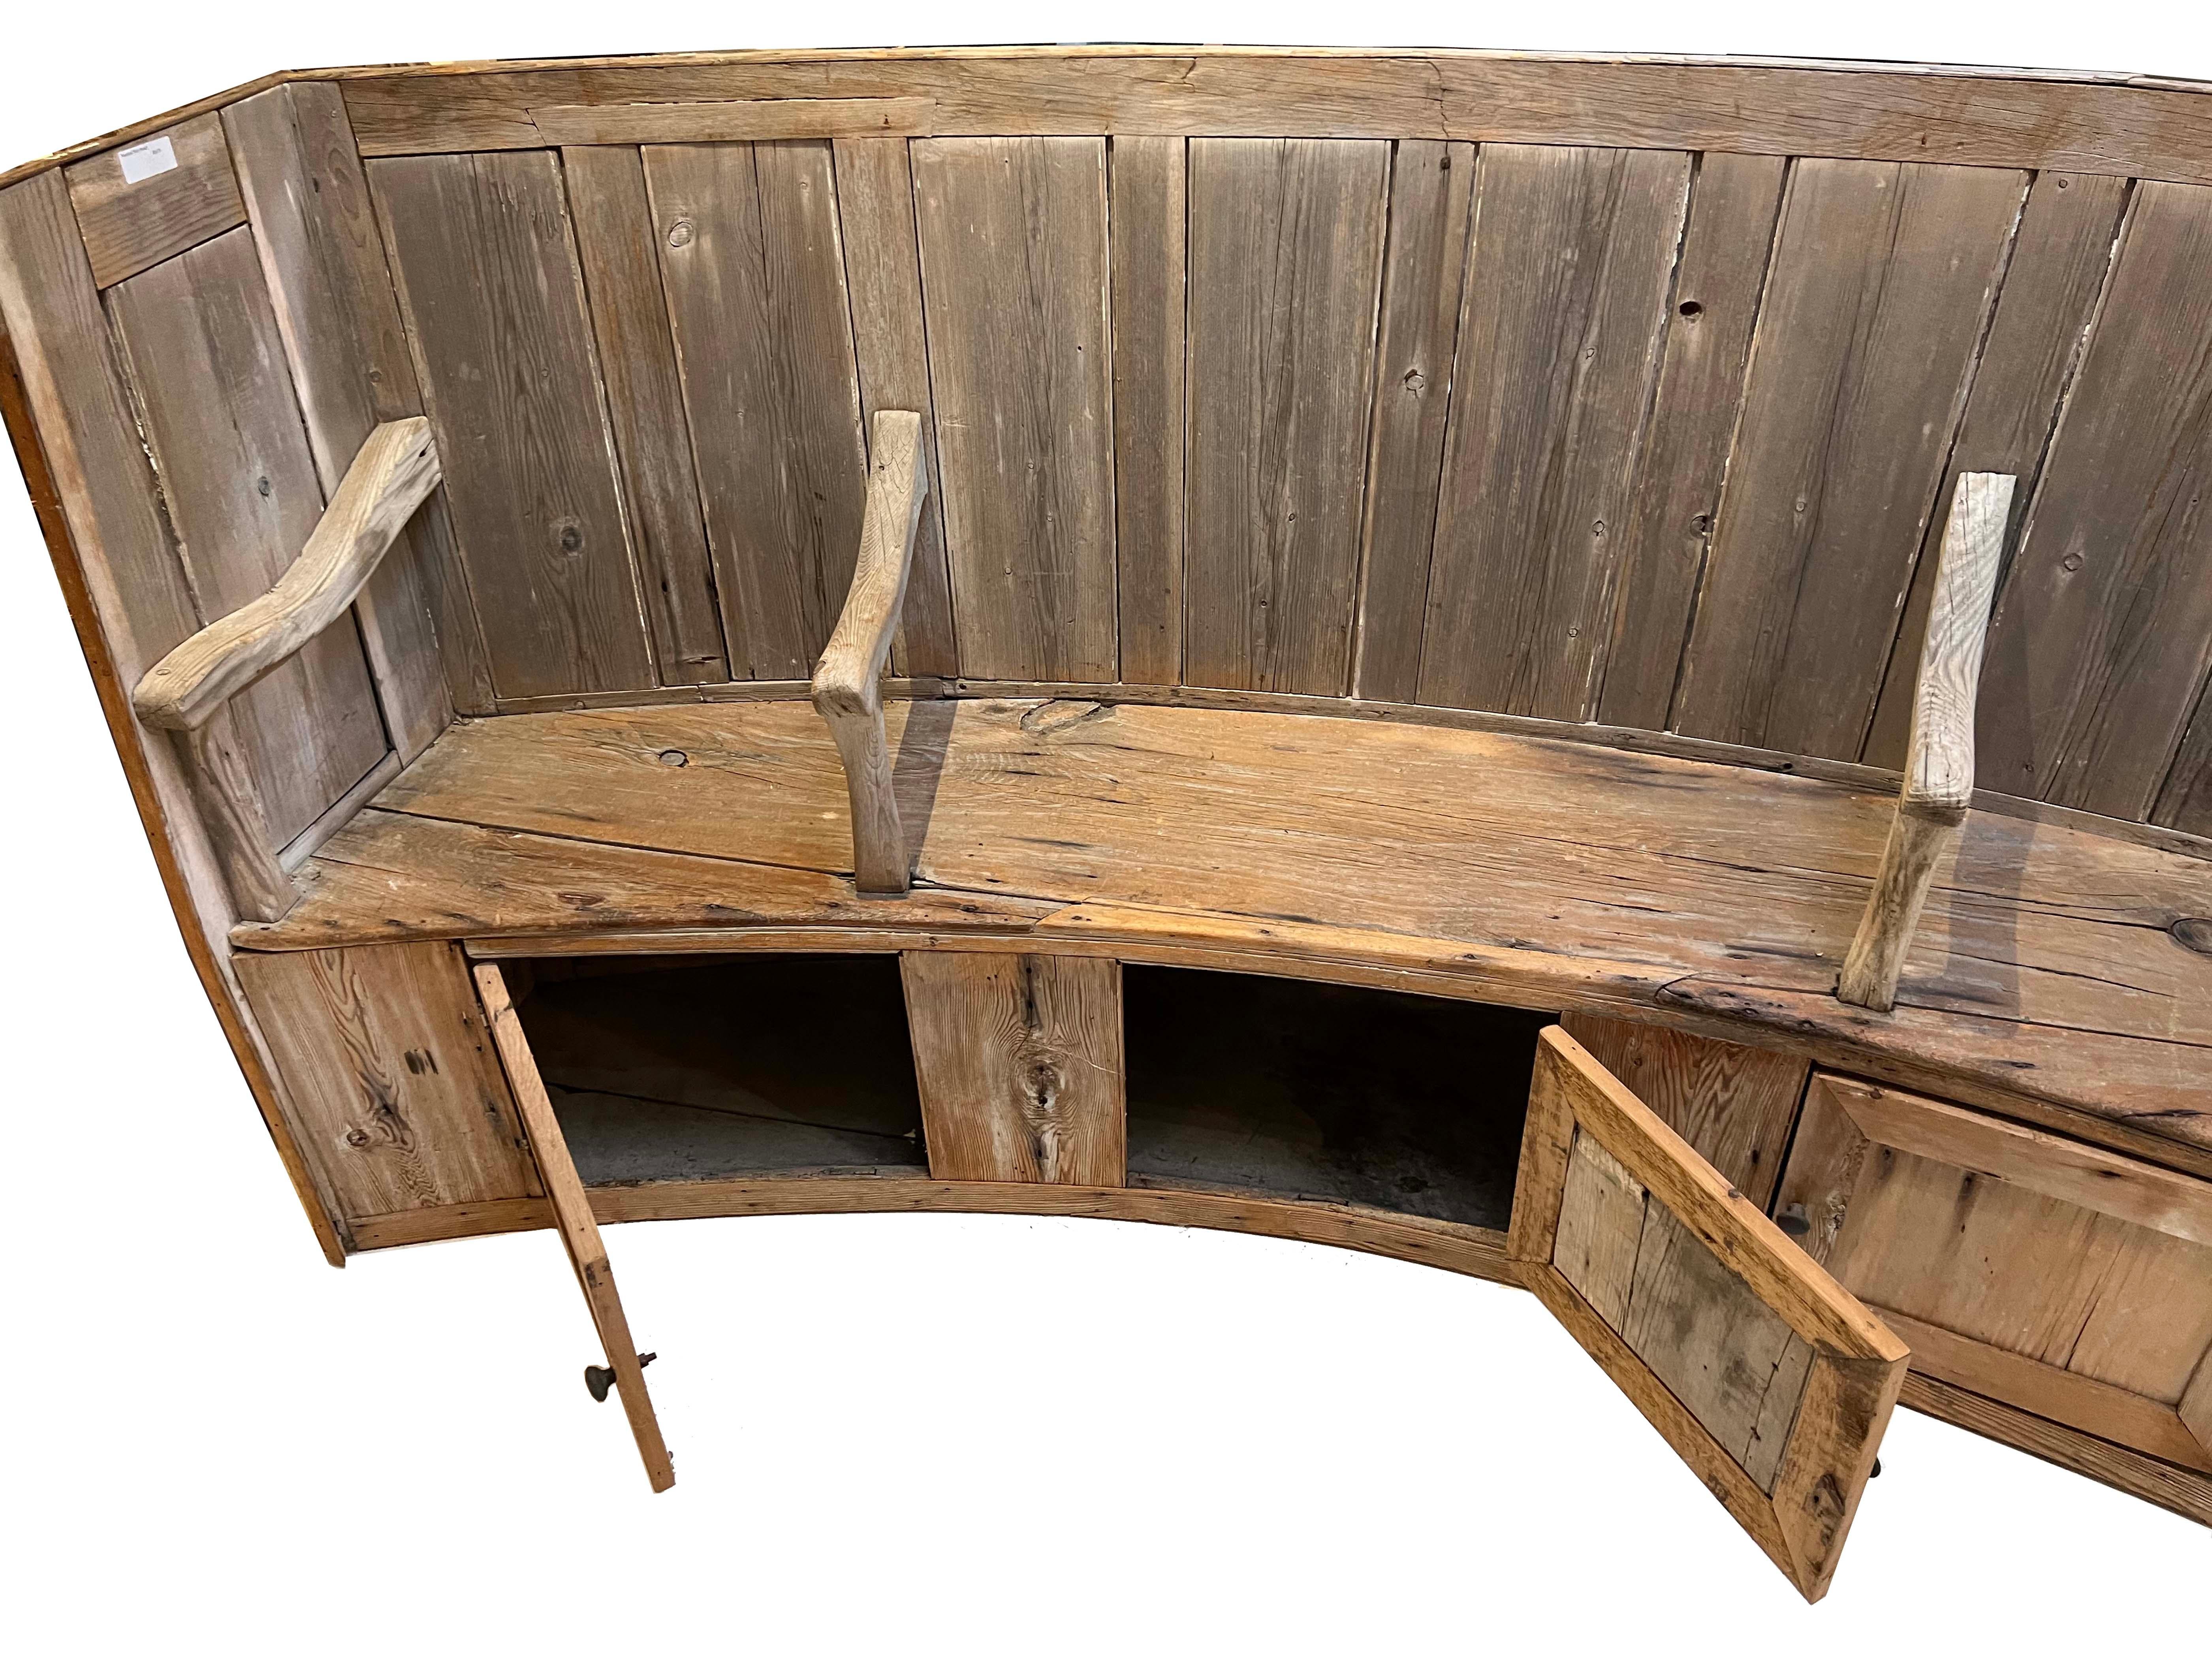 Antique Nautical Ship Bench In Distressed Condition For Sale In Sag Harbor, NY